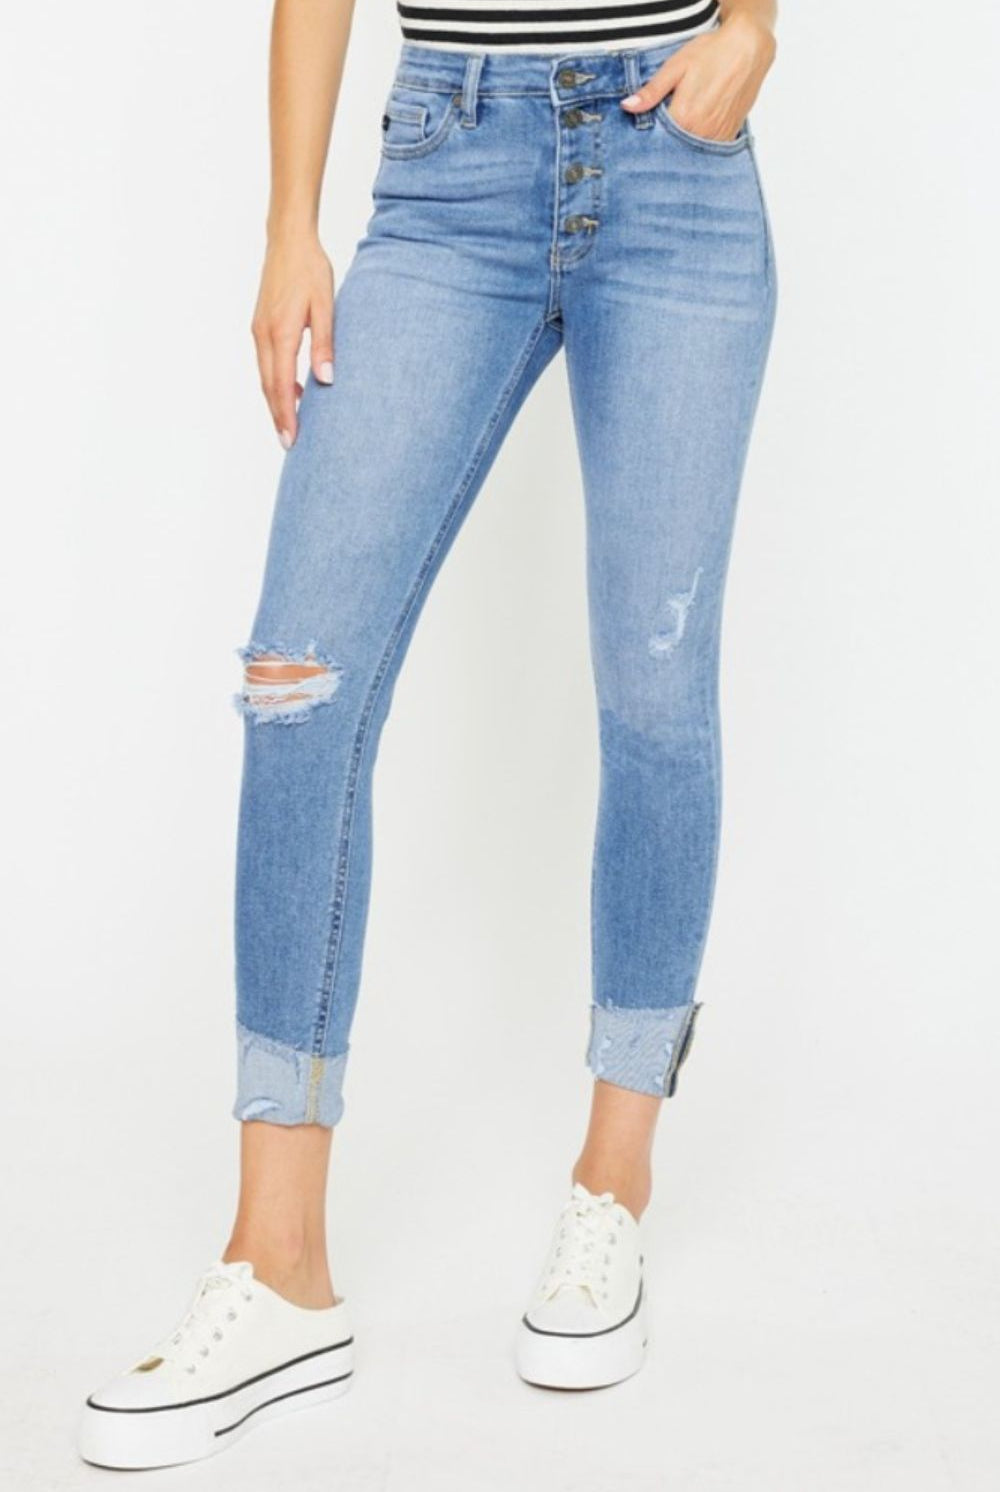 Lavender Kancan Distressed Cat's Whiskers Button Fly Jeans Denim